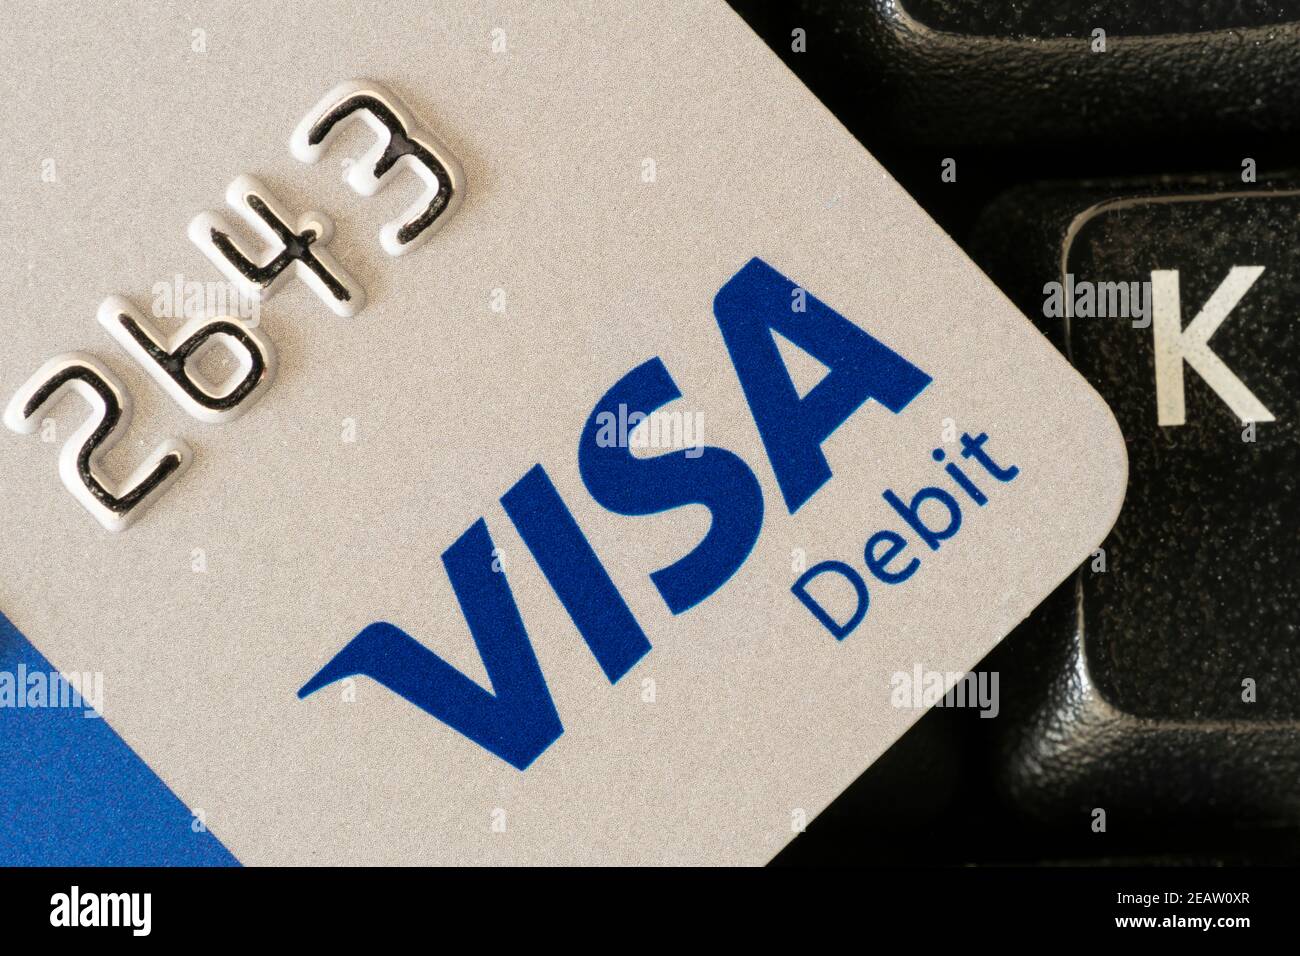 A closeup of the corner of a UK visa debit card resting on a keyboard, showing the card number and the Visa Debit logo Stock Photo